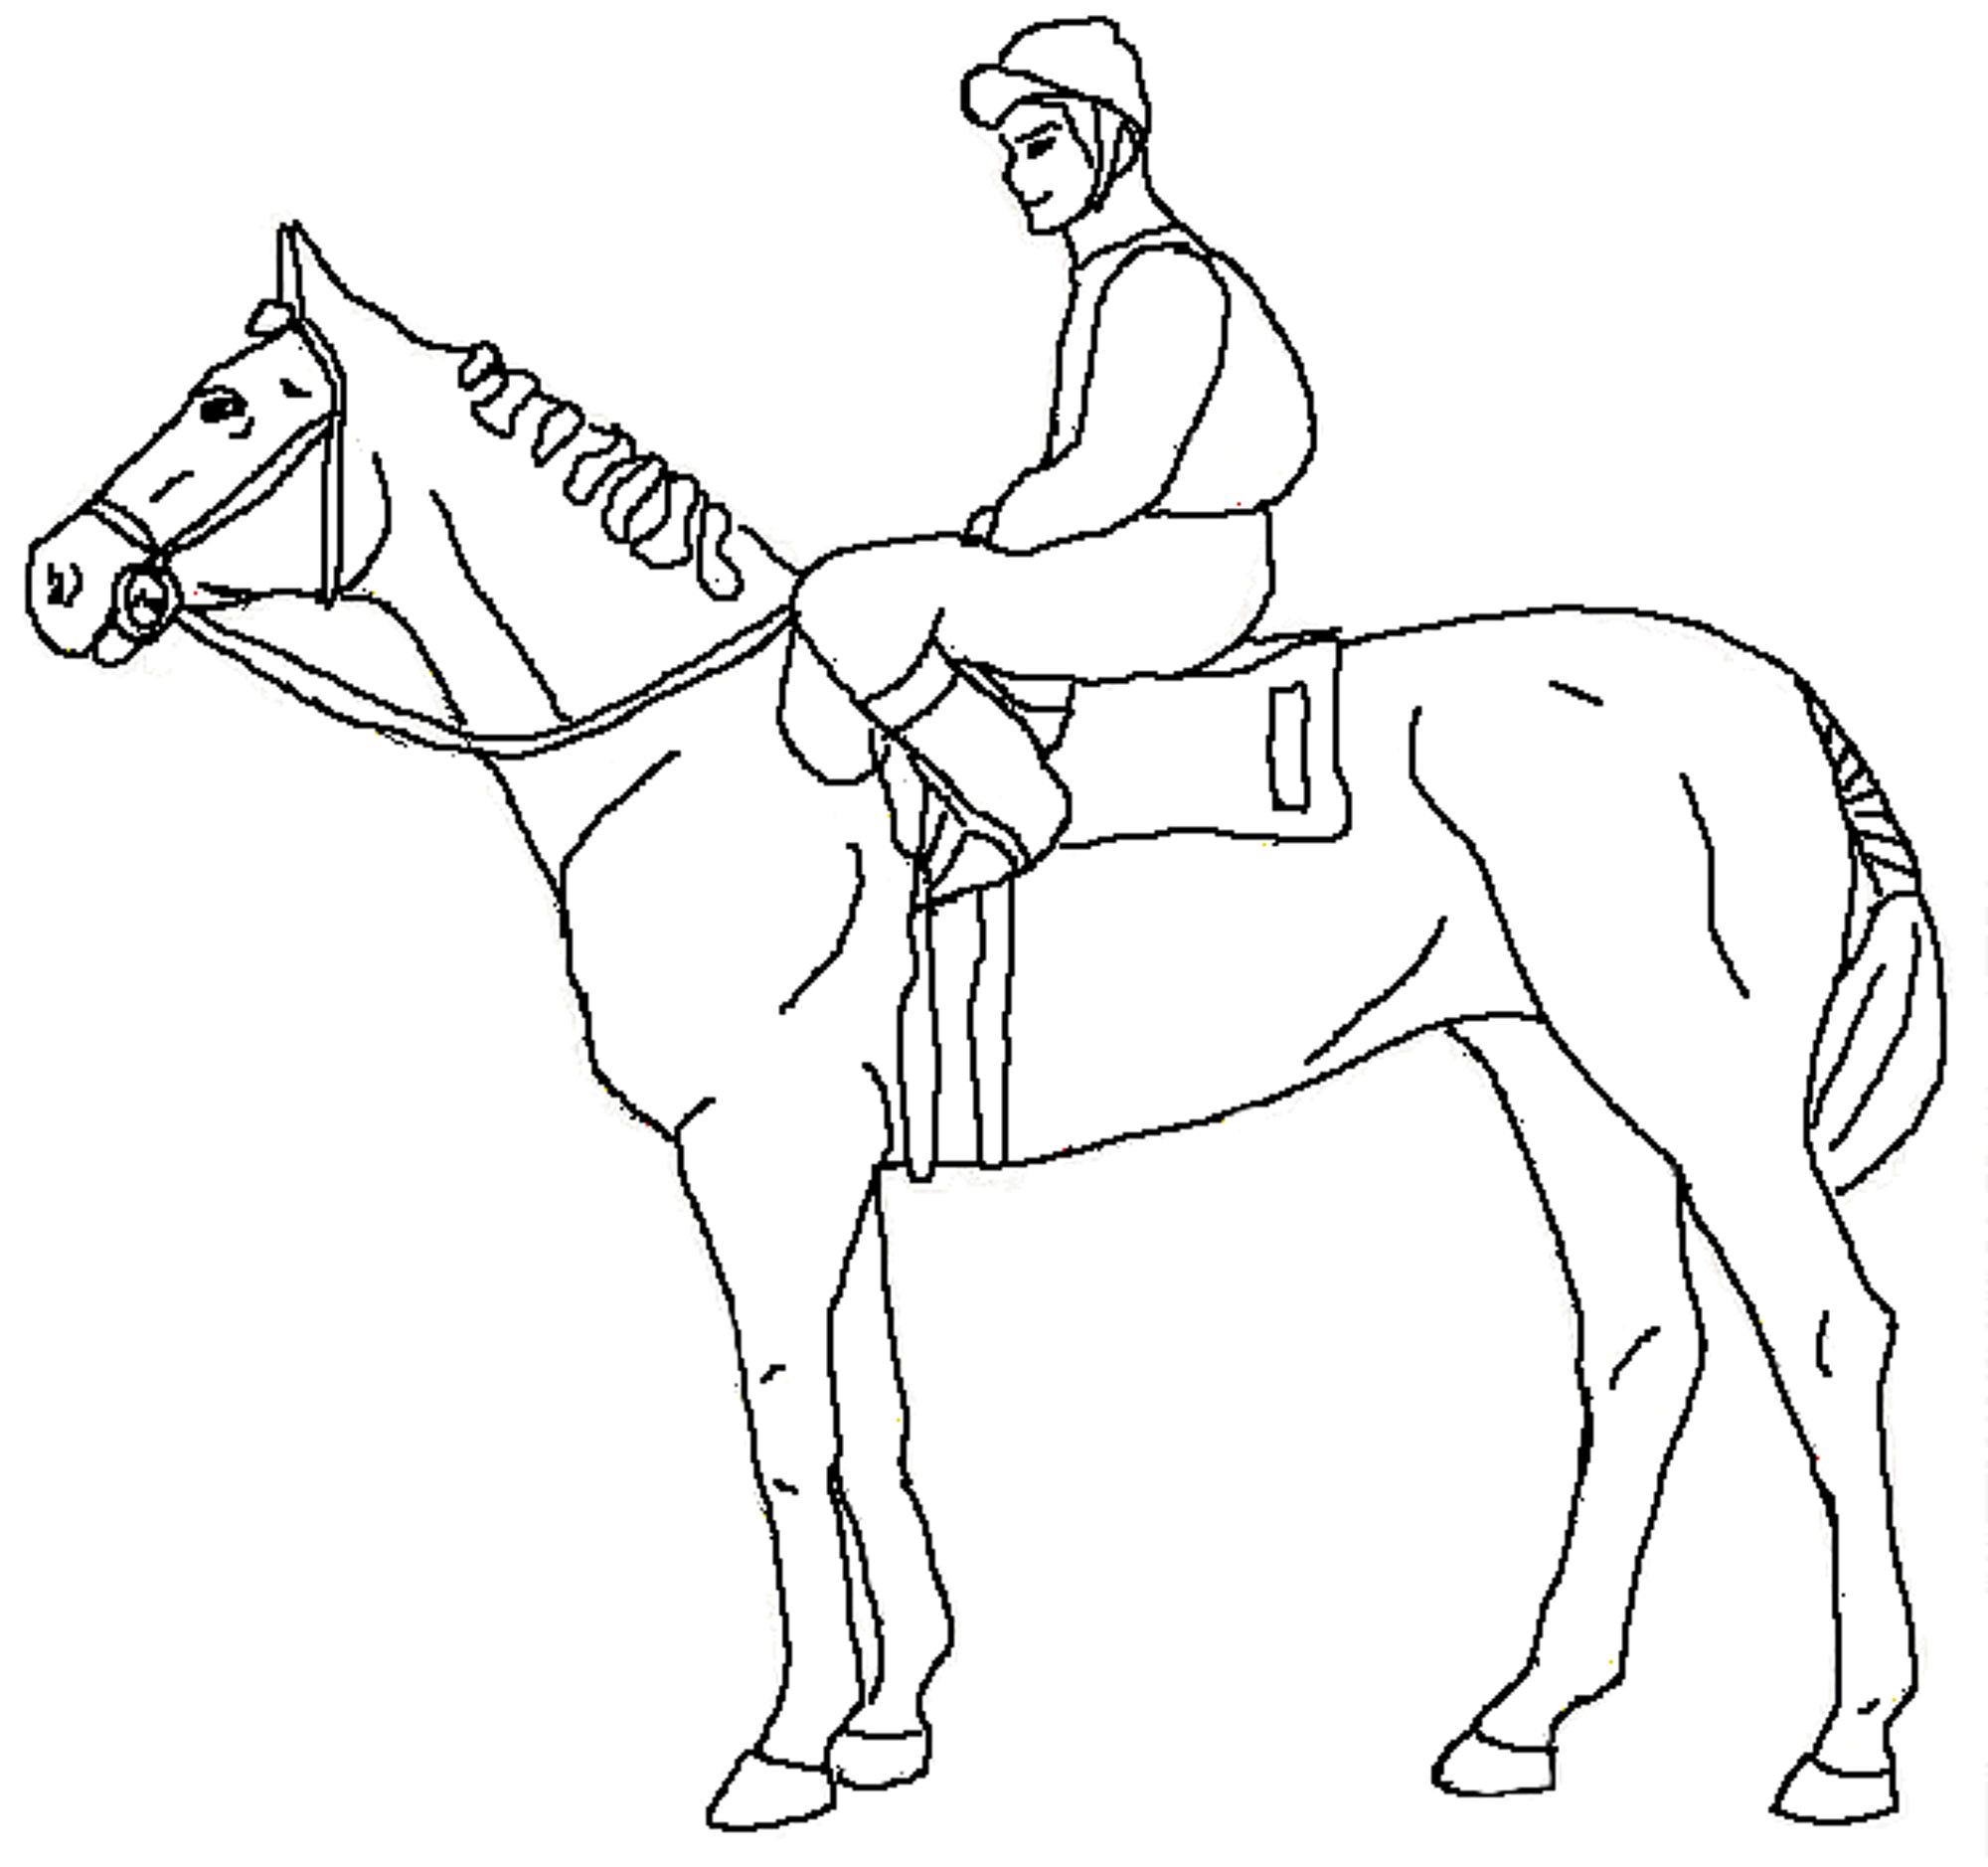 Horse And Rider Coloring Pages at GetColoringscom Free